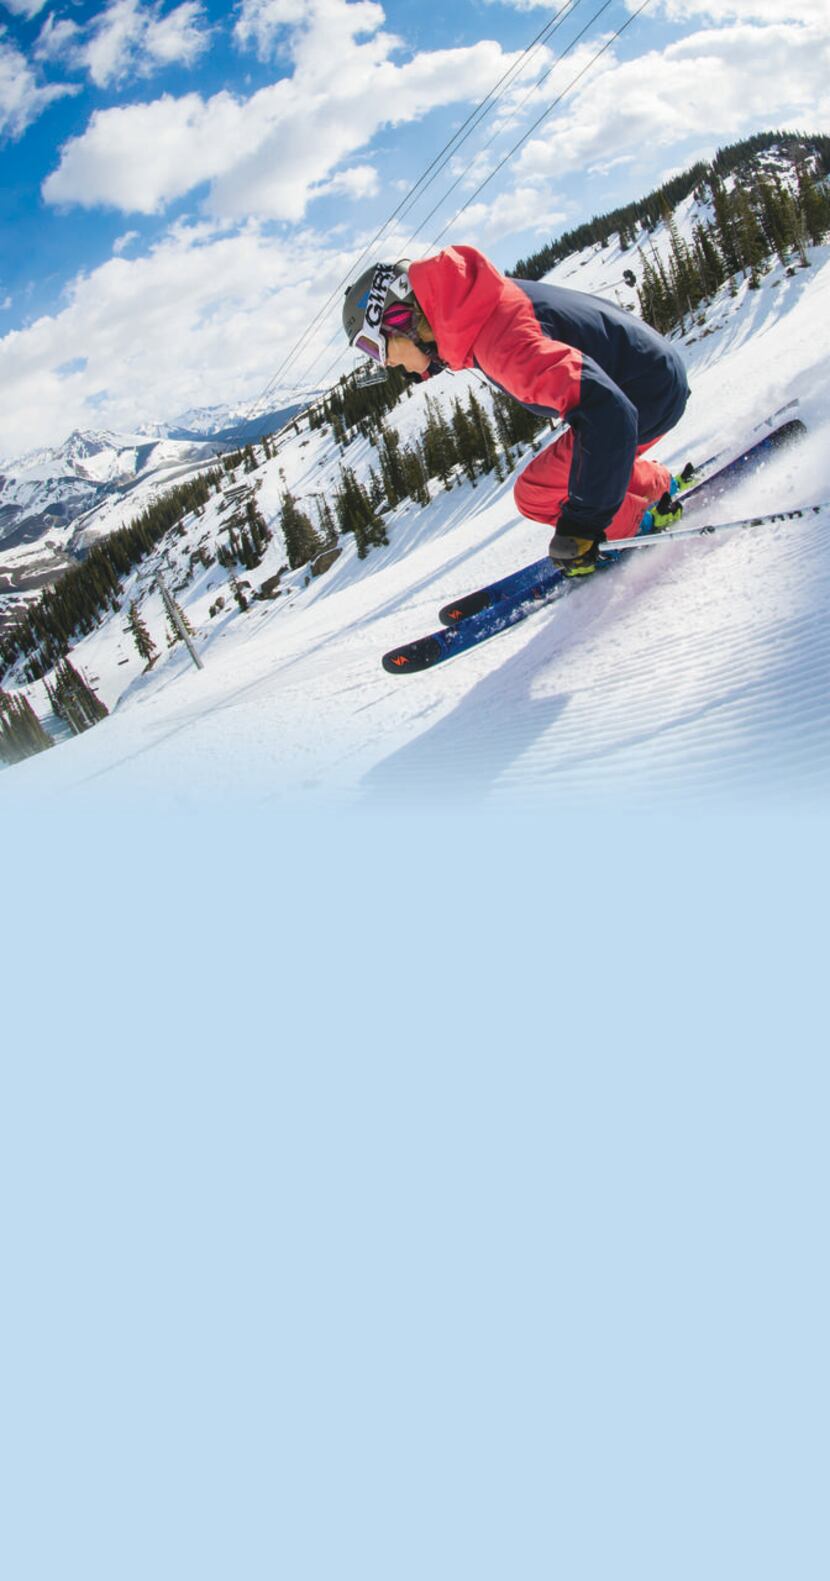 Crested Butte  is one of Colorado’s popular skiing destinations.